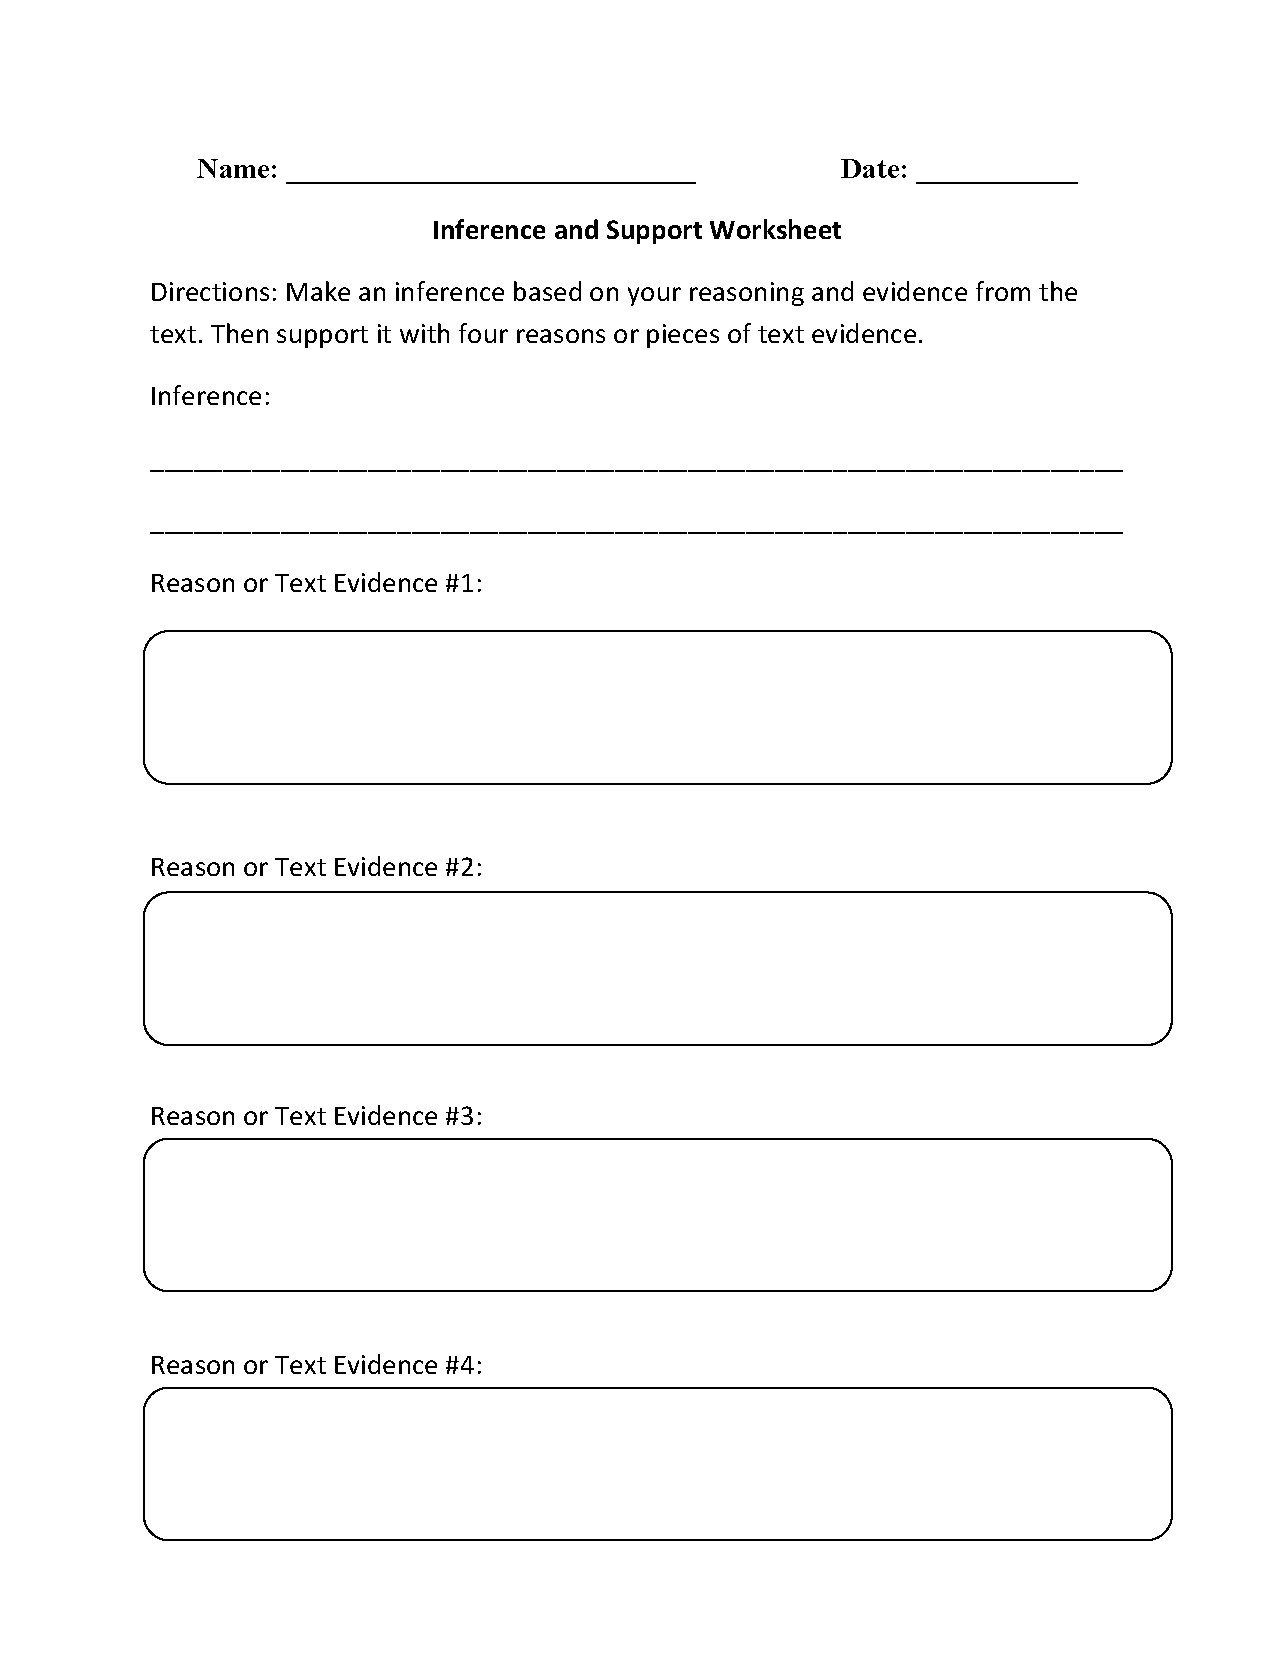 Inference and Support Worksheets